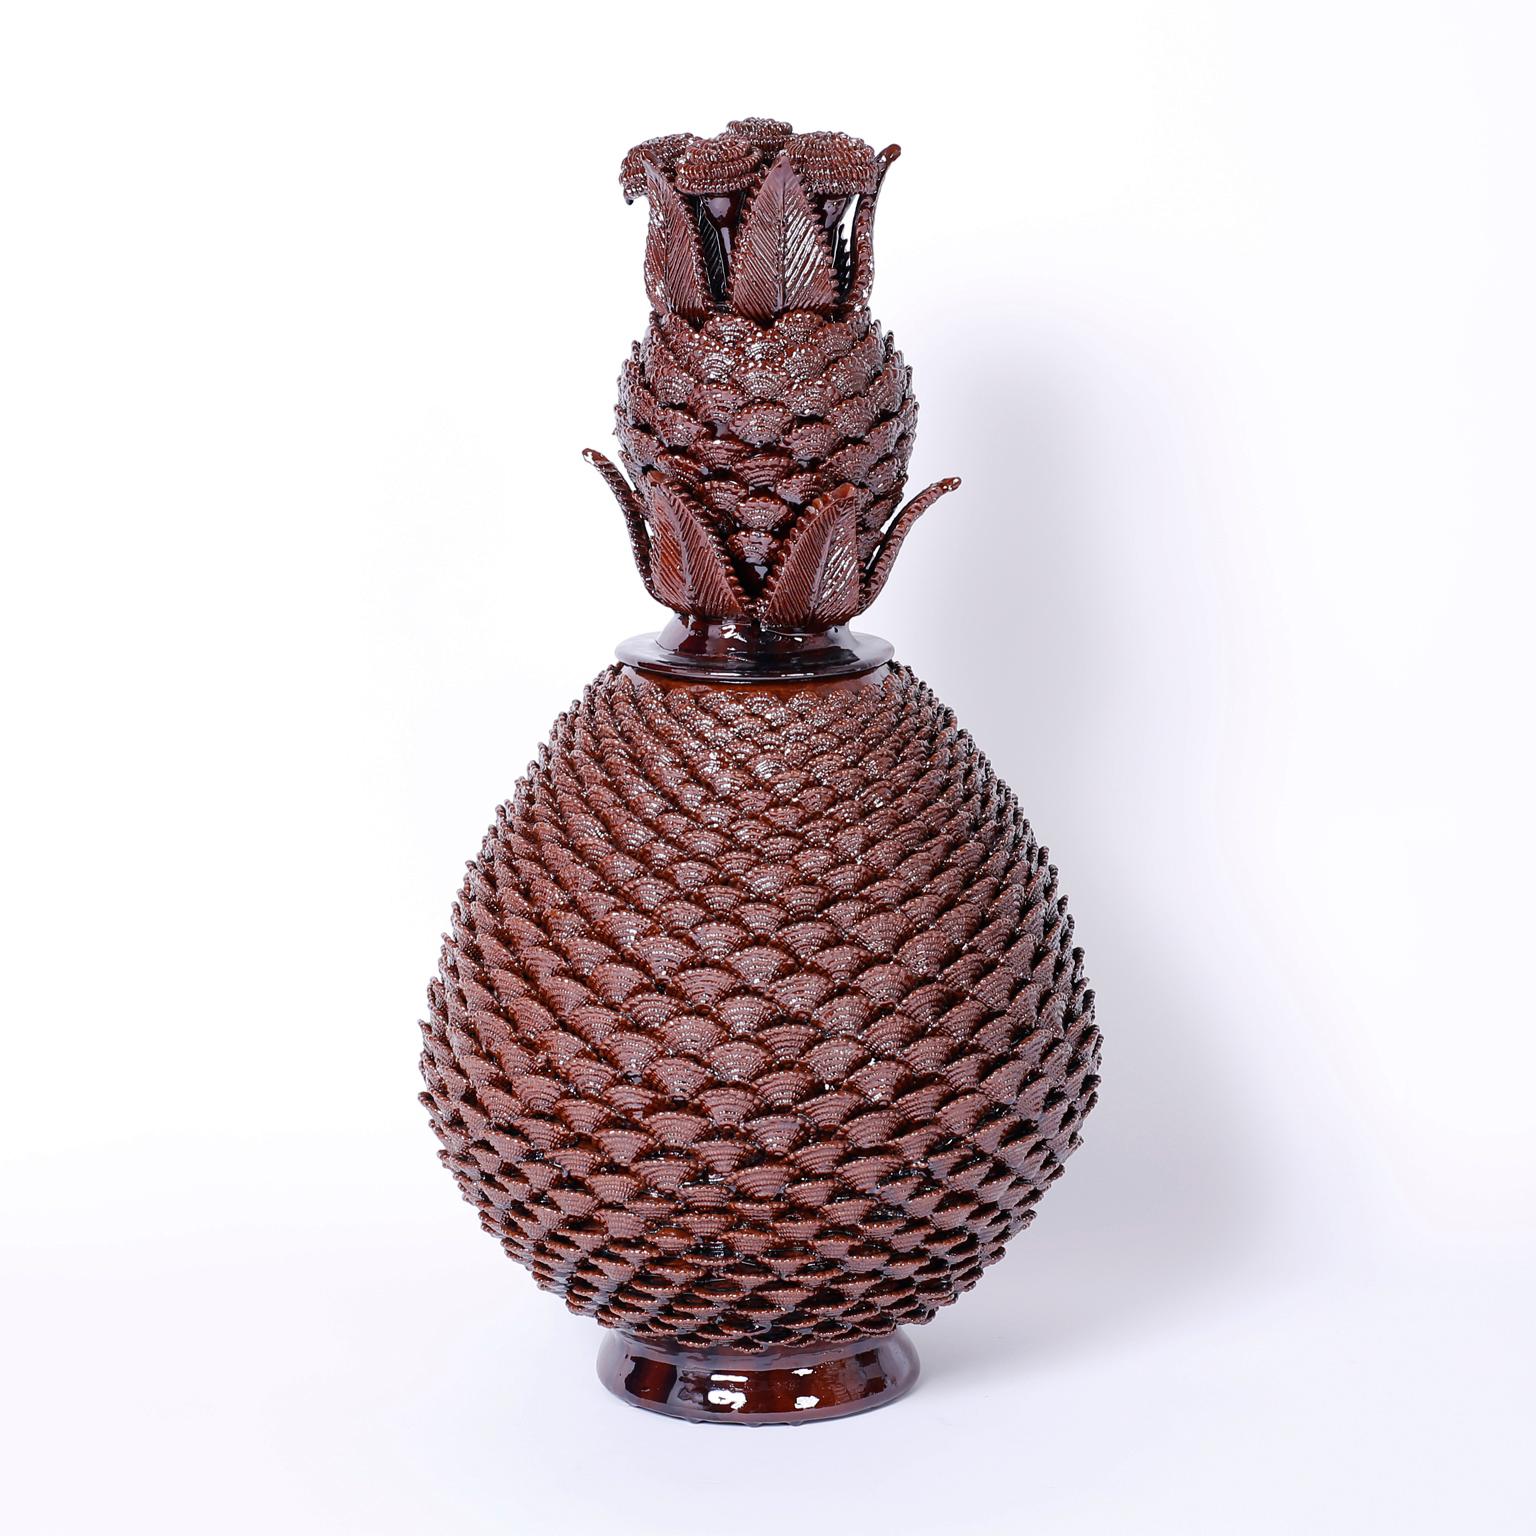 With a striking display of pottery brilliance, this pair of glazed terra cotta stylized pineapple jars feature slightly different floral clusters on the lids and repeating husks or shells wrapped around the entire body. 

Height varies by 1